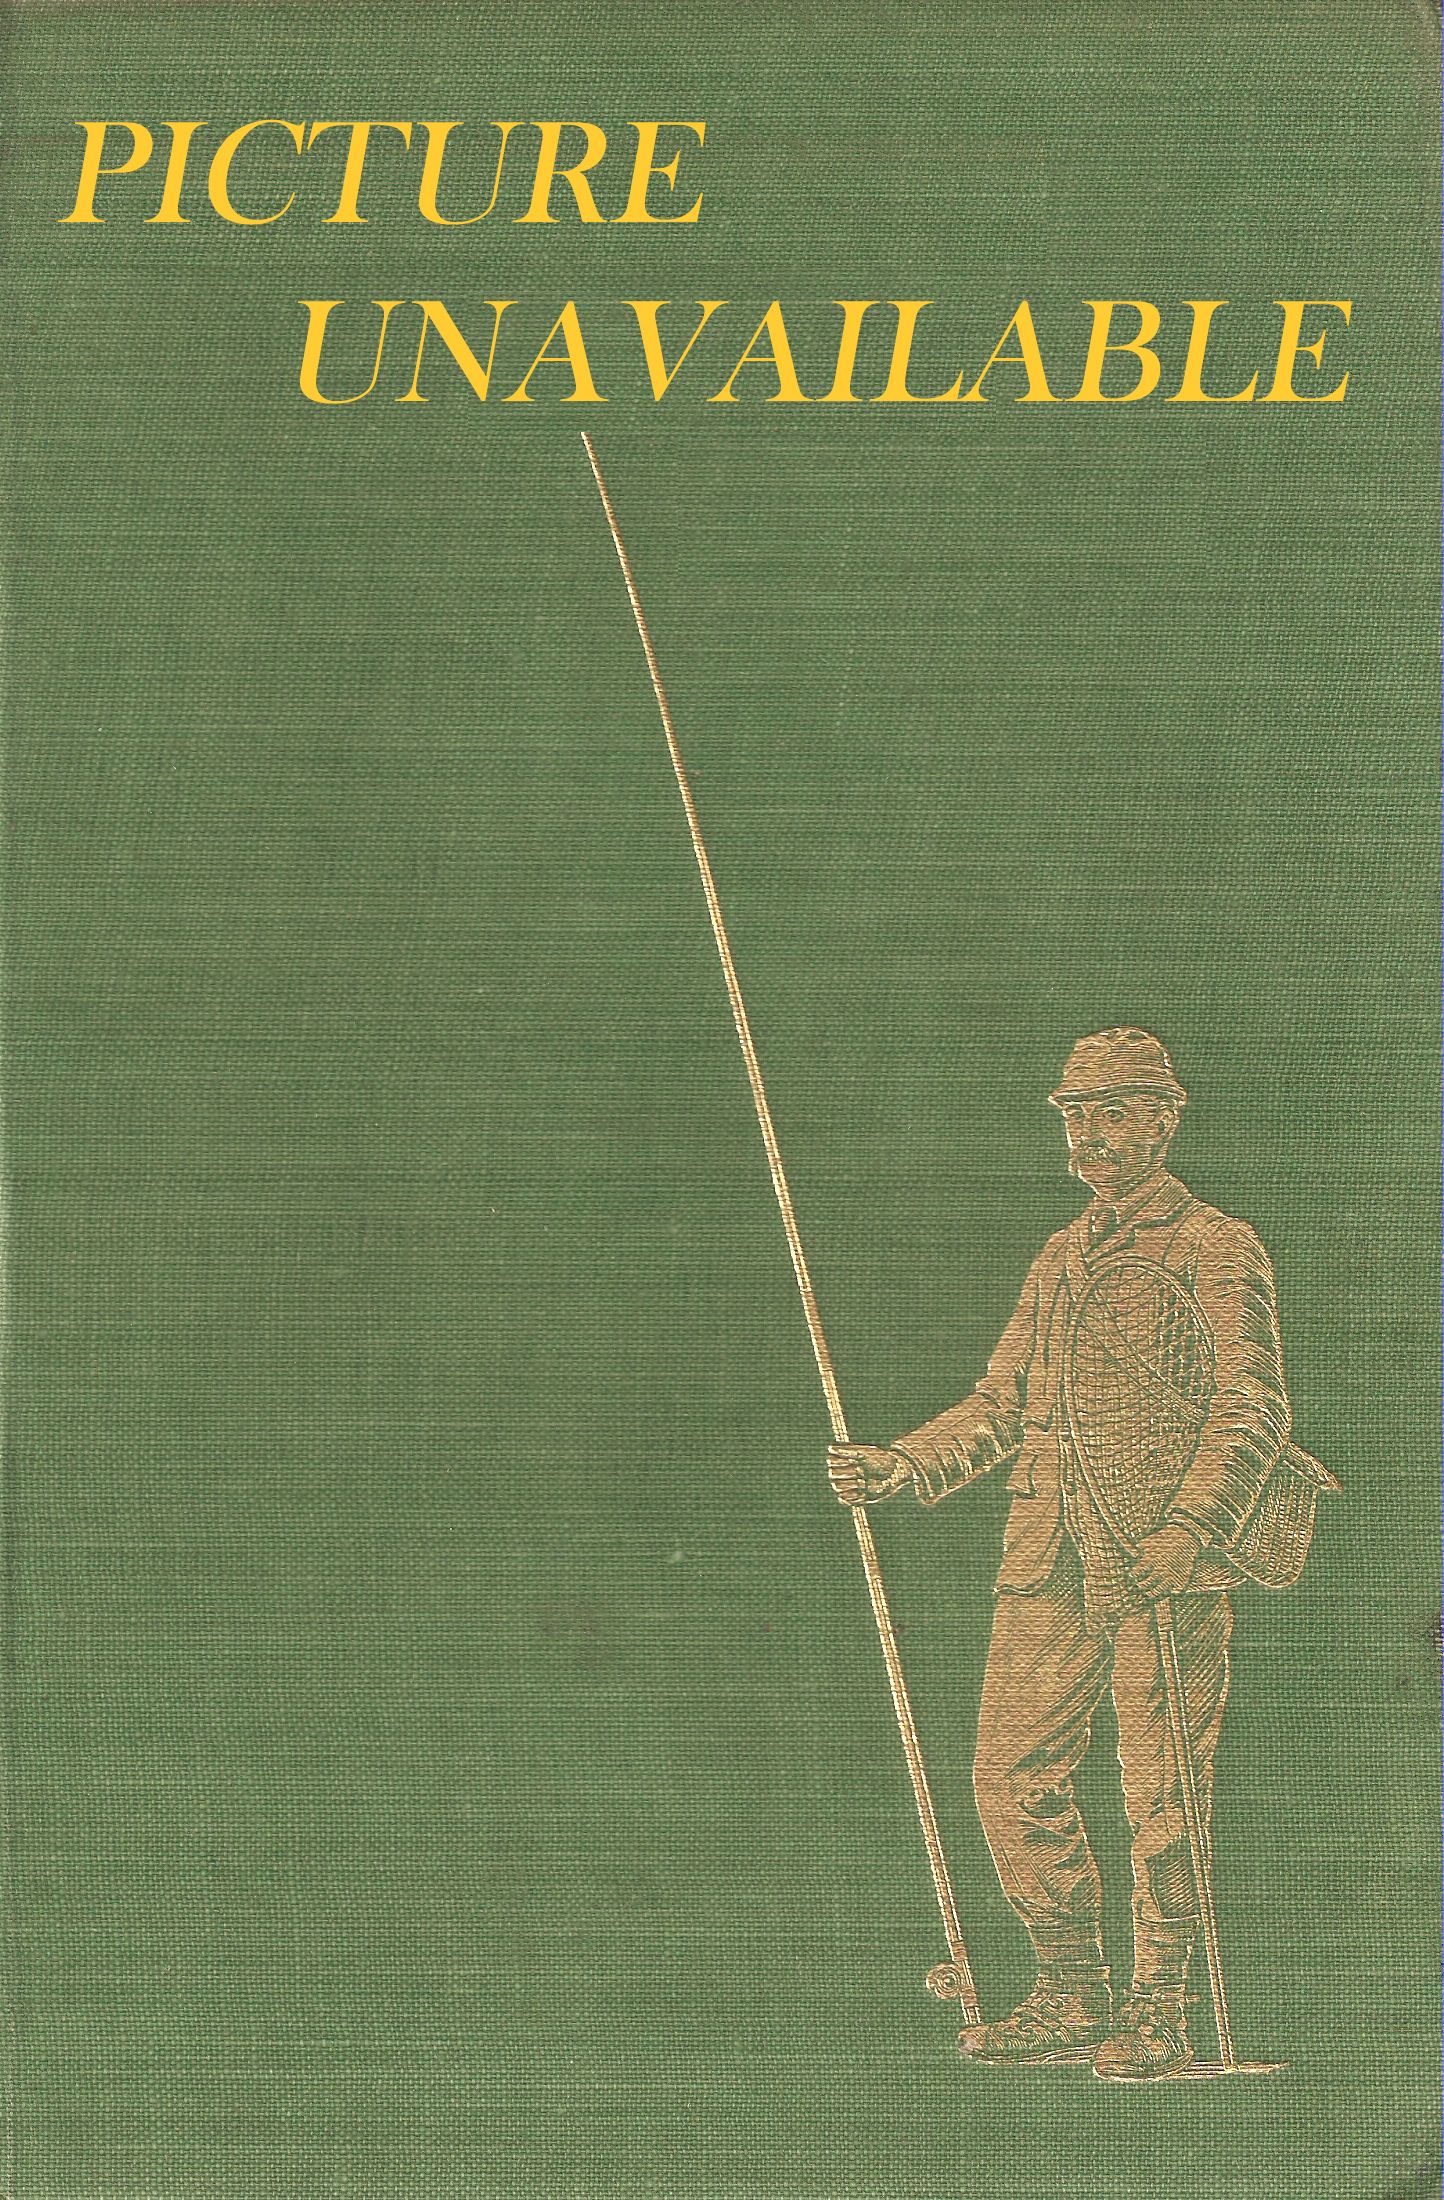 A GAME RANGER'S NOTE BOOK. By A. Blayney Percival. Edited by E.D. Cuming.  With illustrations from photographs by the author and Mr. Martin Johnson.